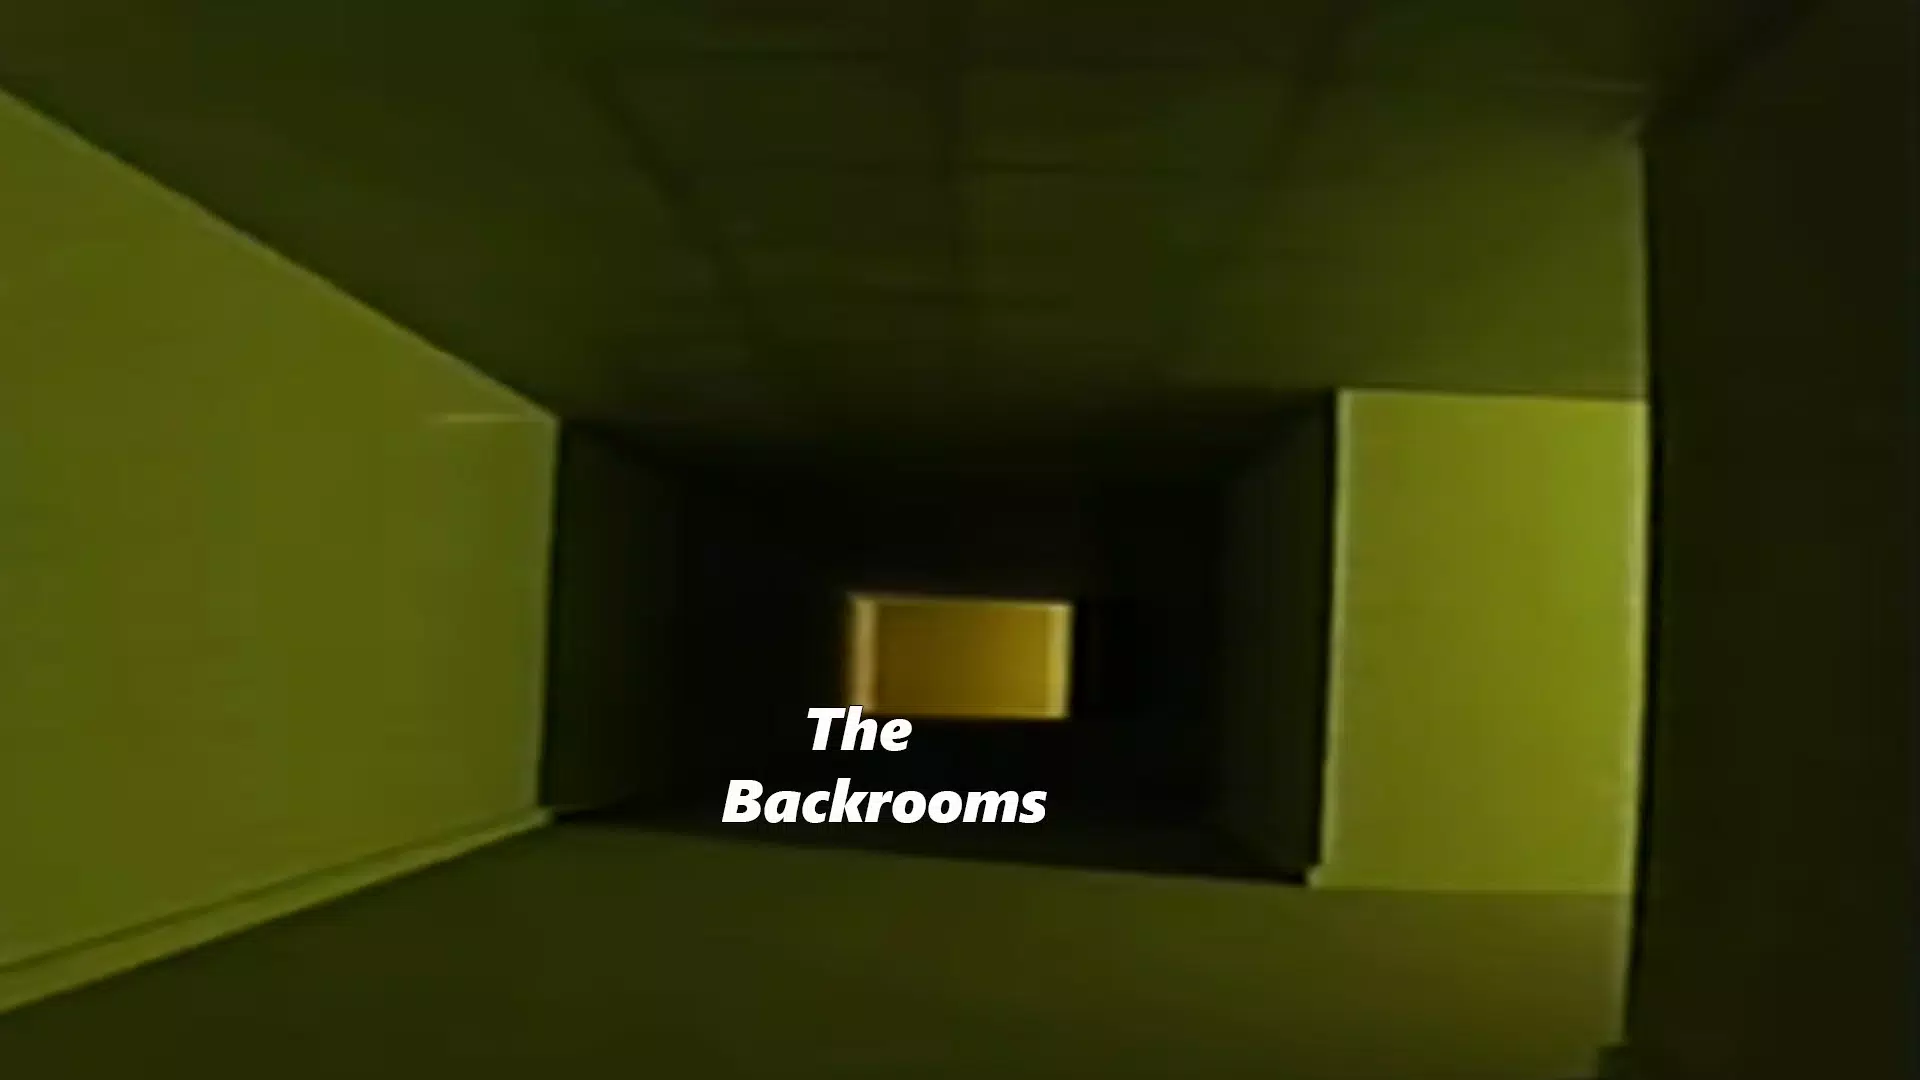 Noclipping Out of Reality  The Backrooms (/x/ story & game) 